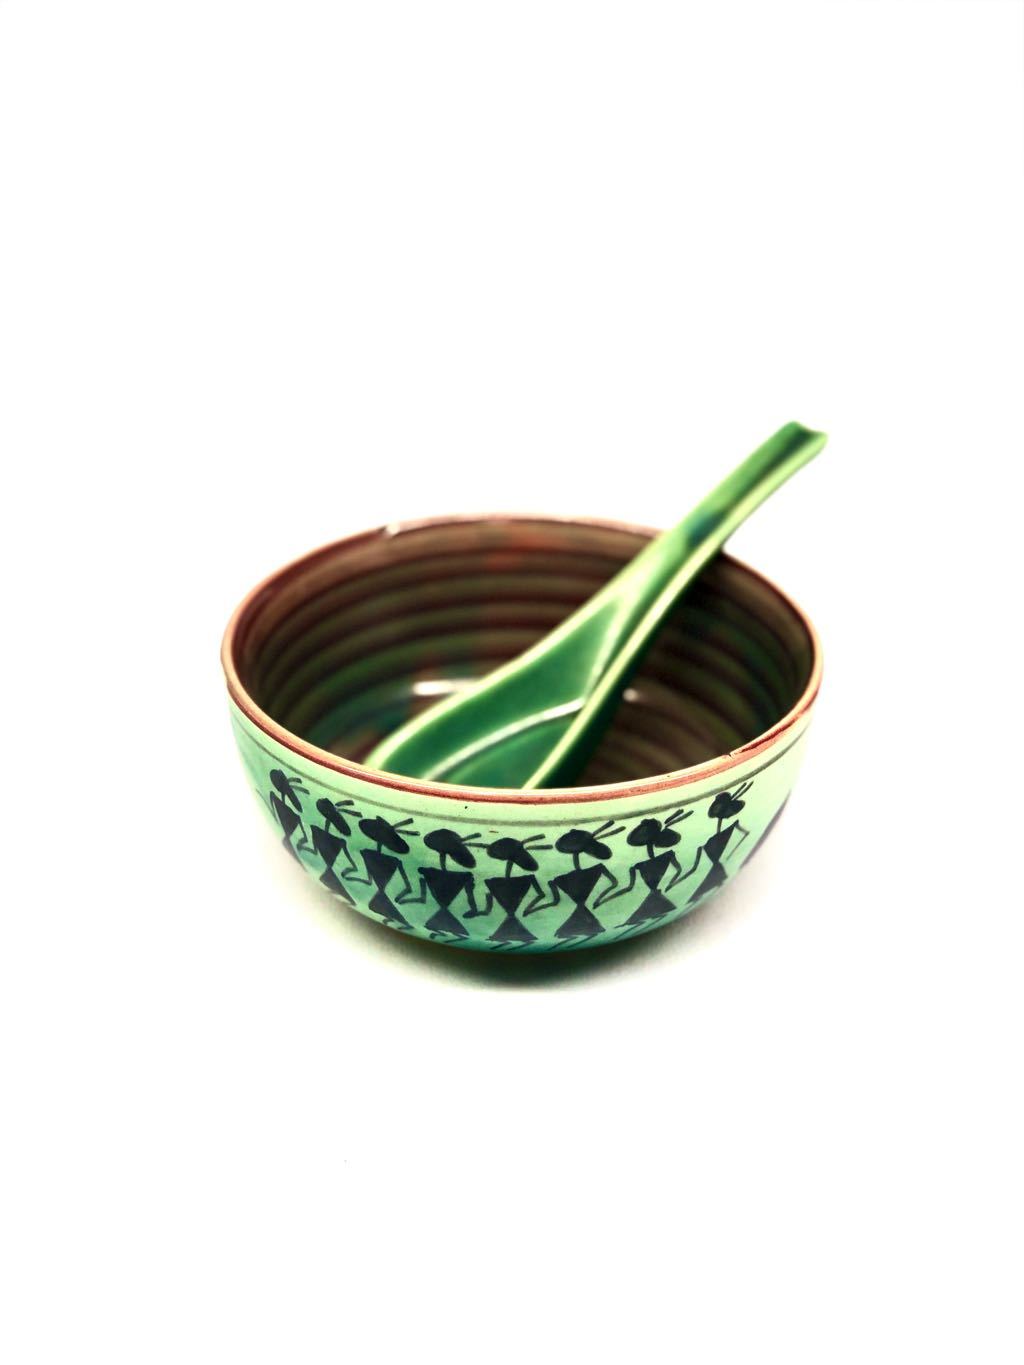 Designer Soup Bowl With Spoon Made Of Ceramic Dinning Utility Tamrapatra